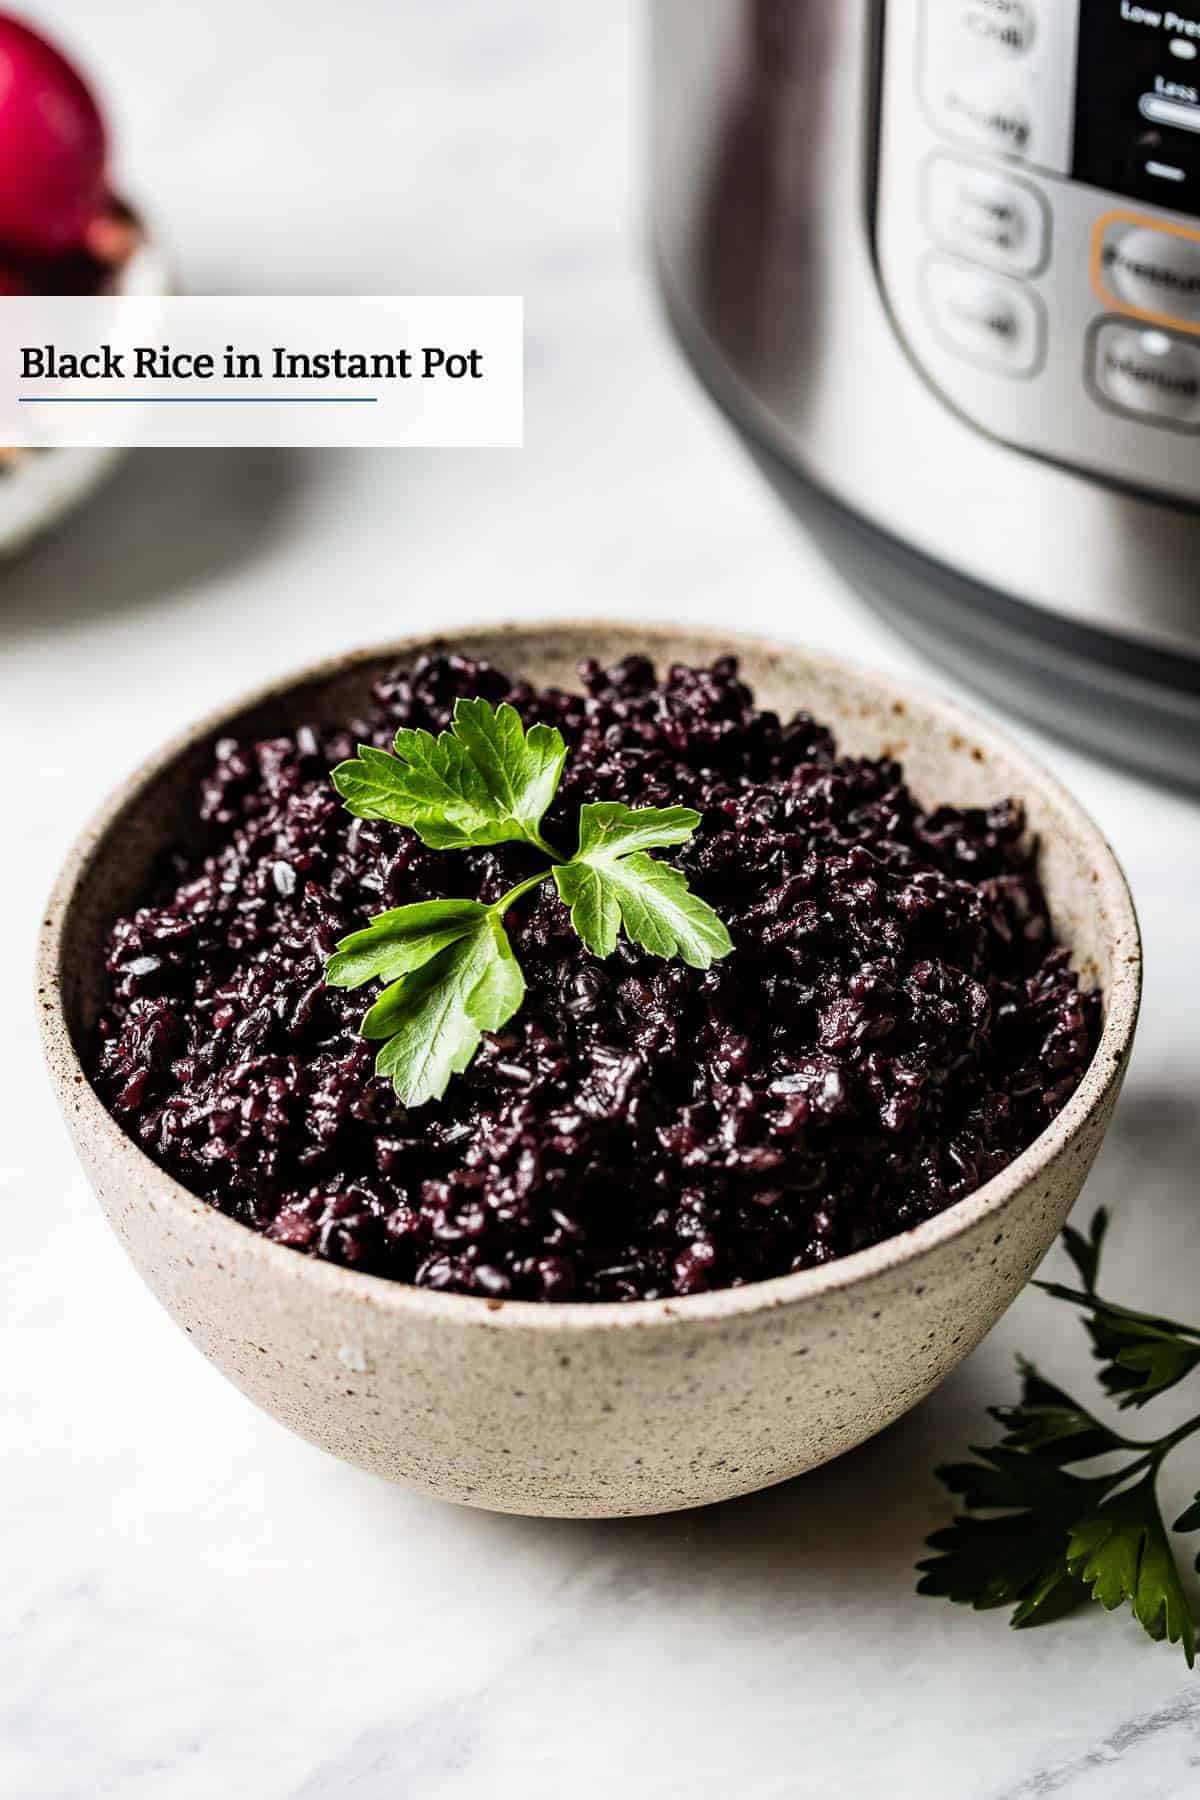 Instant pot black rice in a bowl with parsley as garnish